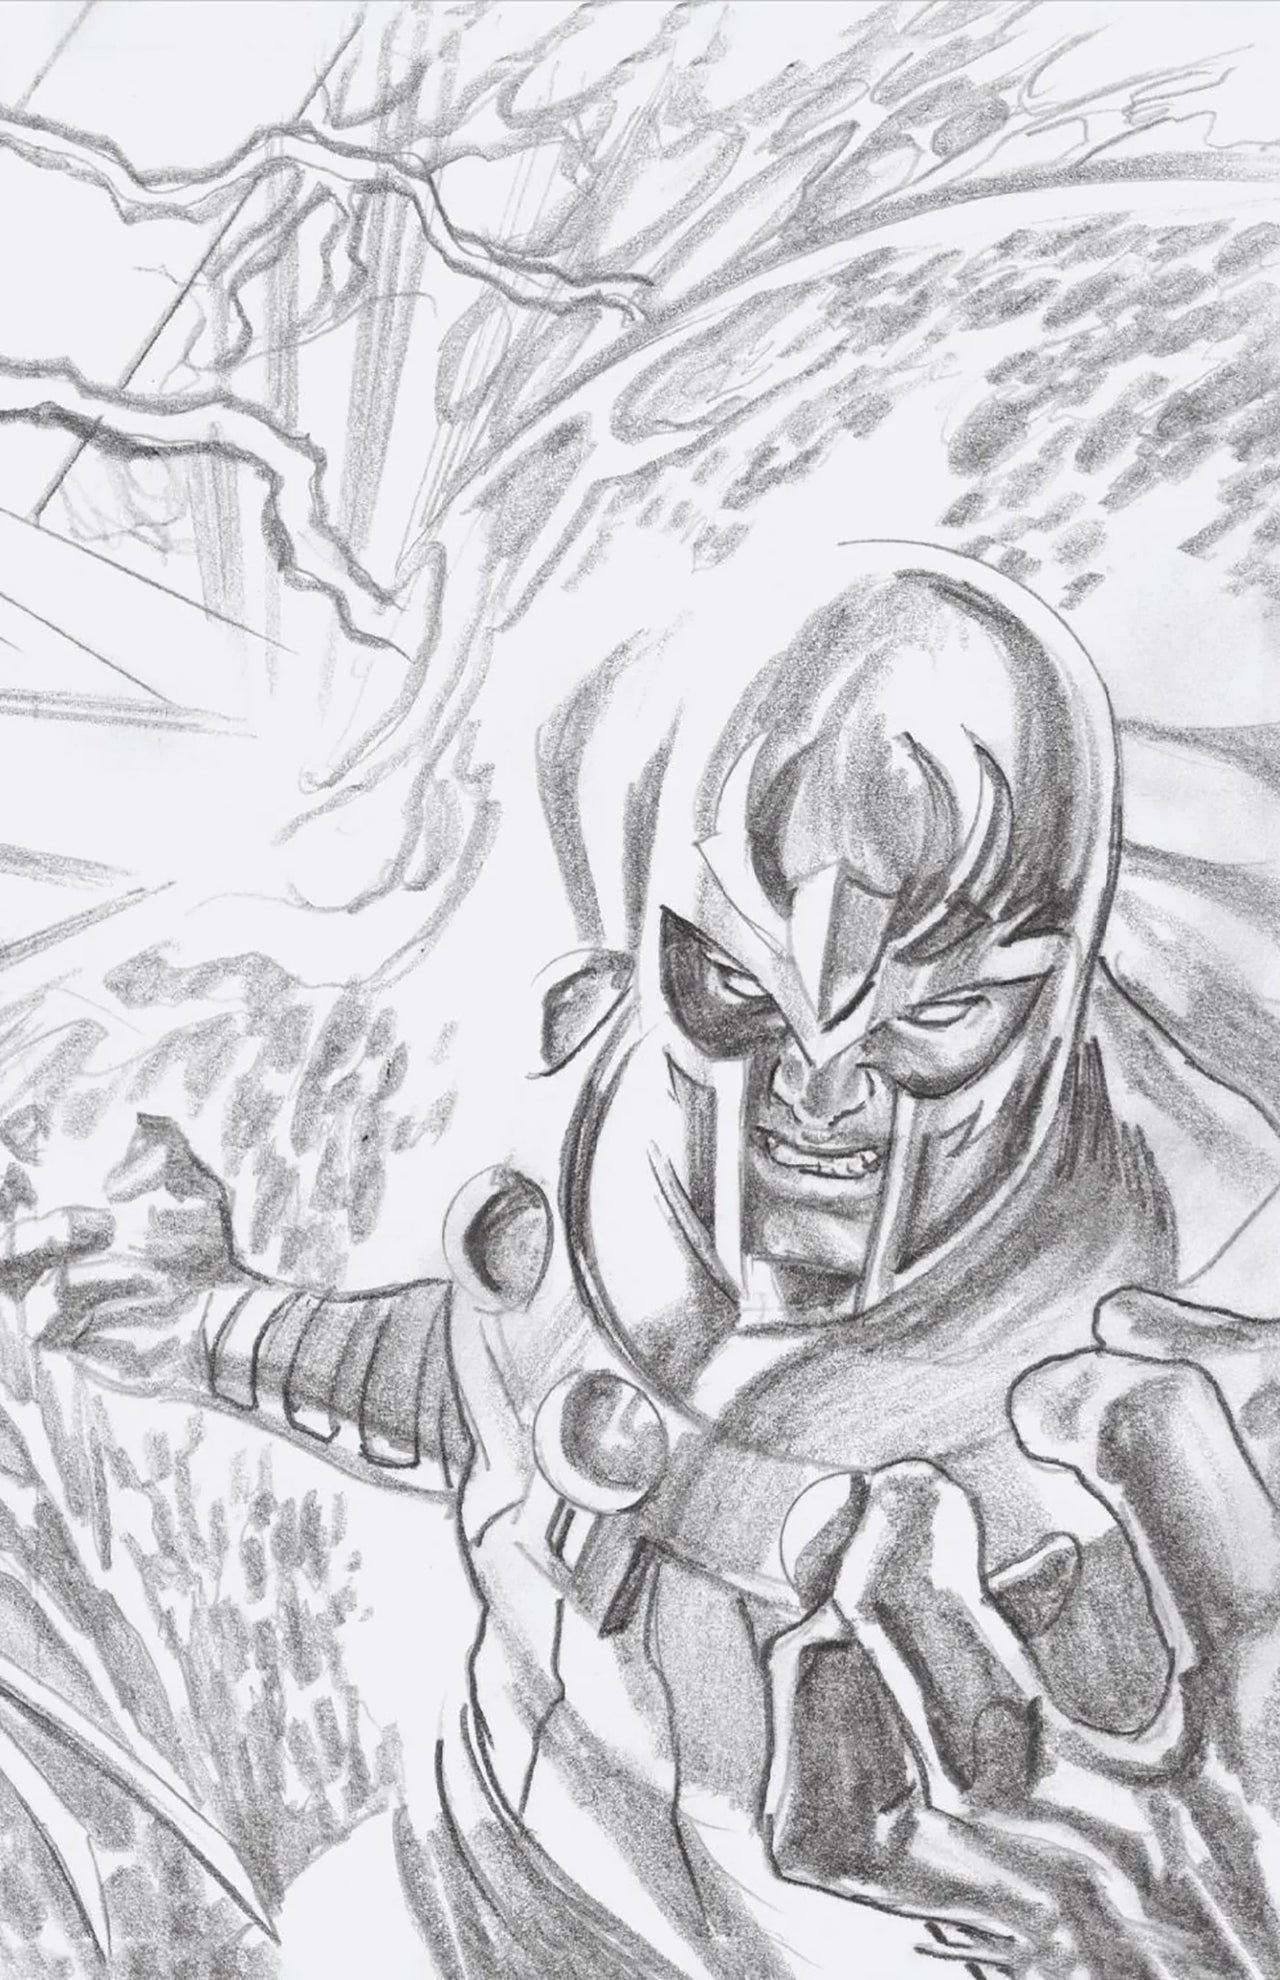 X-MEN #26 1:100 ALEX ROSS SKETCH CONNECTING COVER